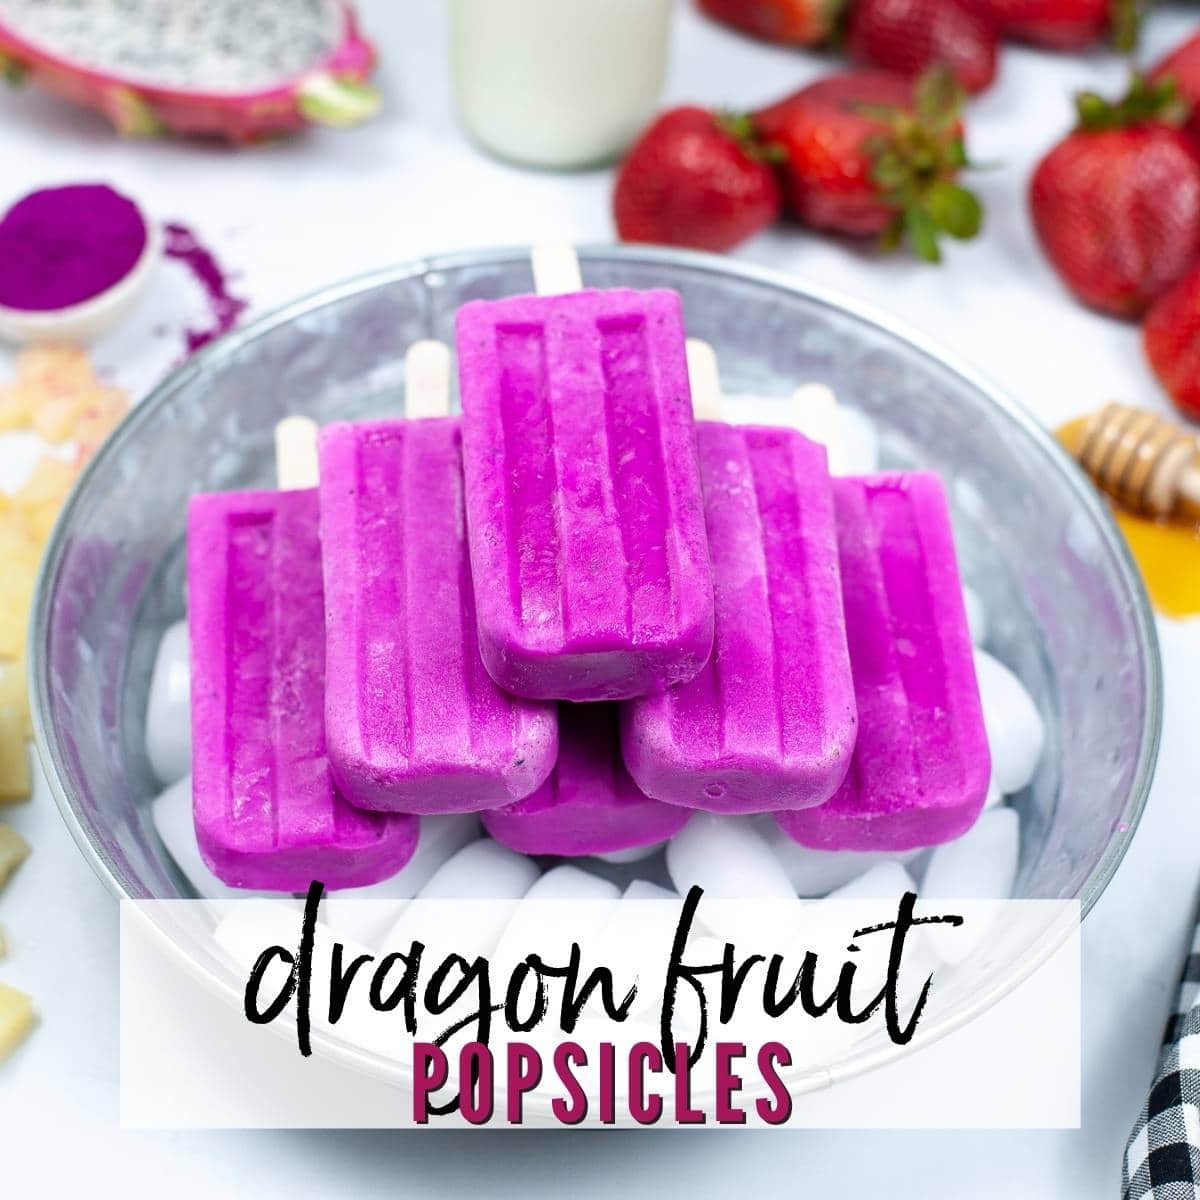 top shot of a batch of dragon fruit popsicles on ice in a galvanized tub with text overlay